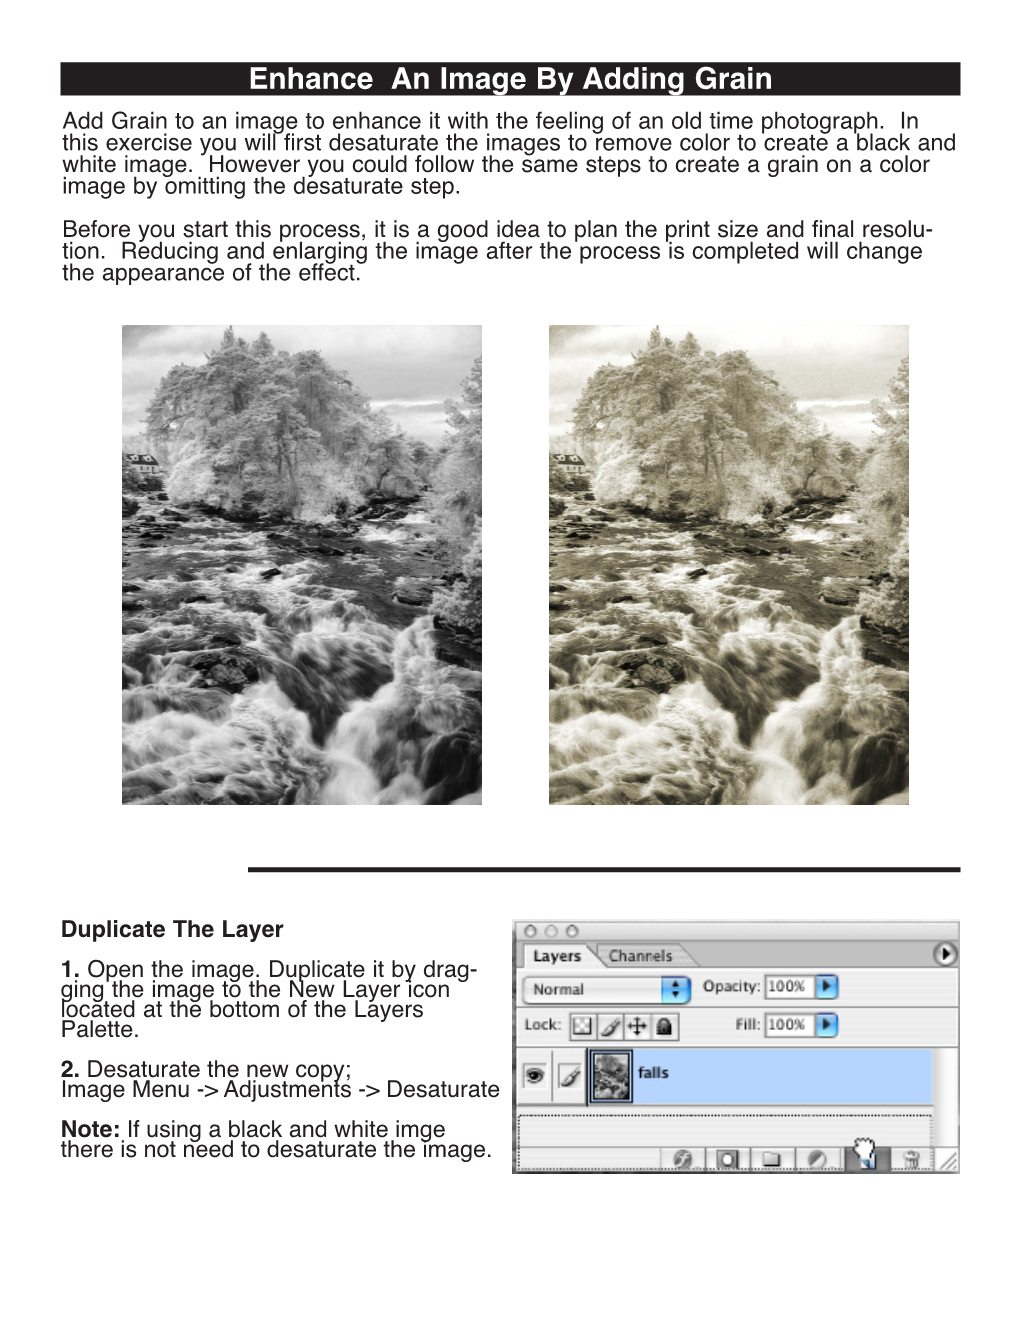 Enhance an Image by Adding Grain Add Grain to an Image to Enhance It with the Feeling of an Old Time Photograph